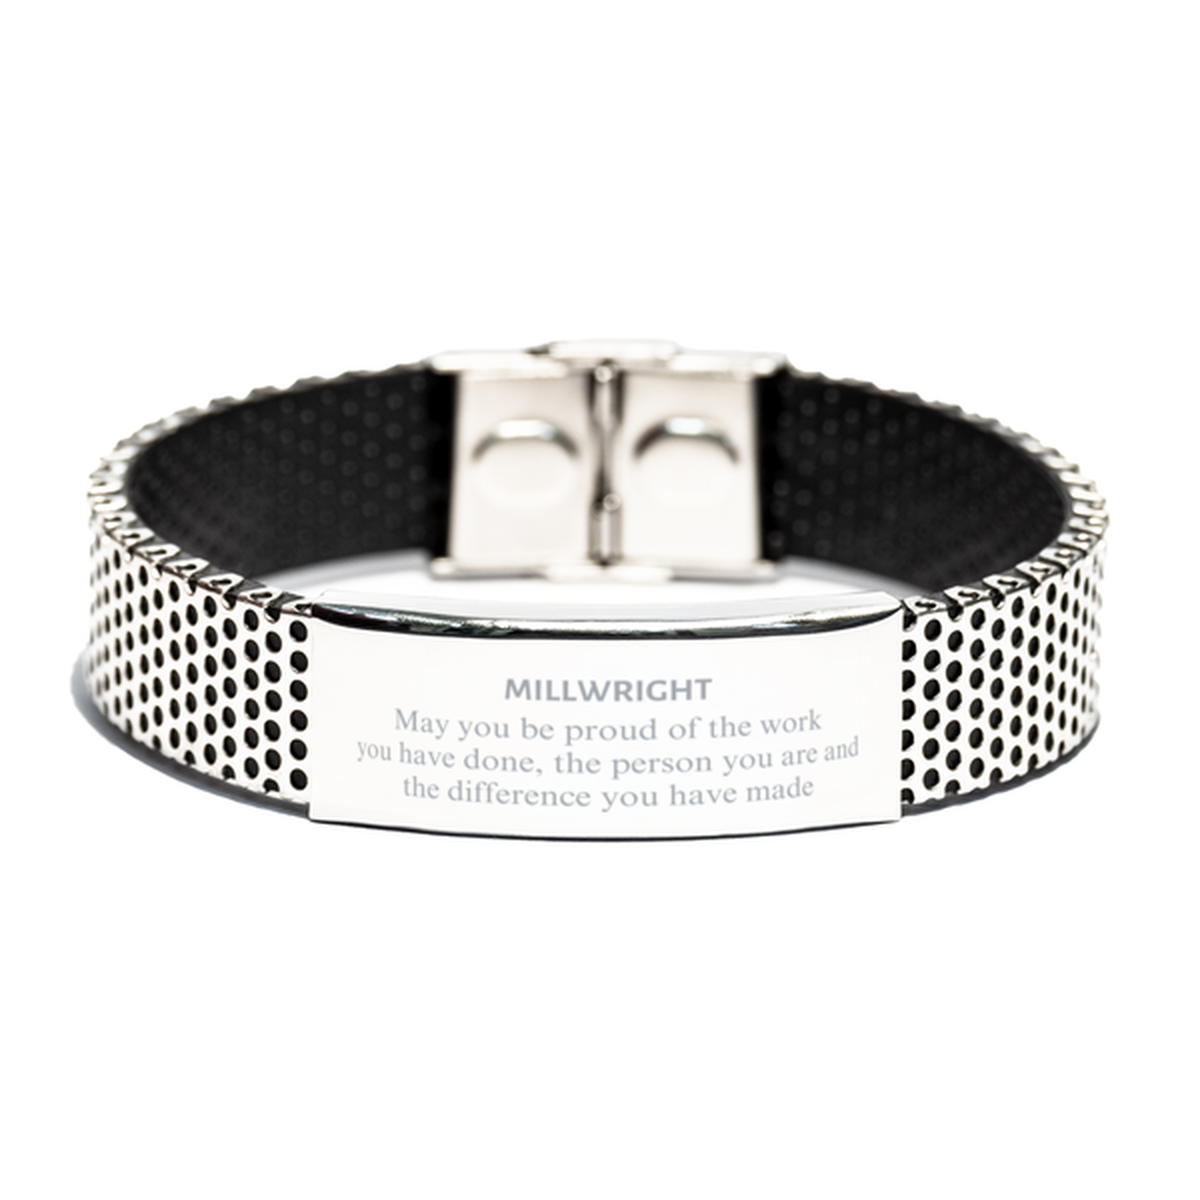 Millwright May you be proud of the work you have done, Retirement Millwright Stainless Steel Bracelet for Colleague Appreciation Gifts Amazing for Millwright